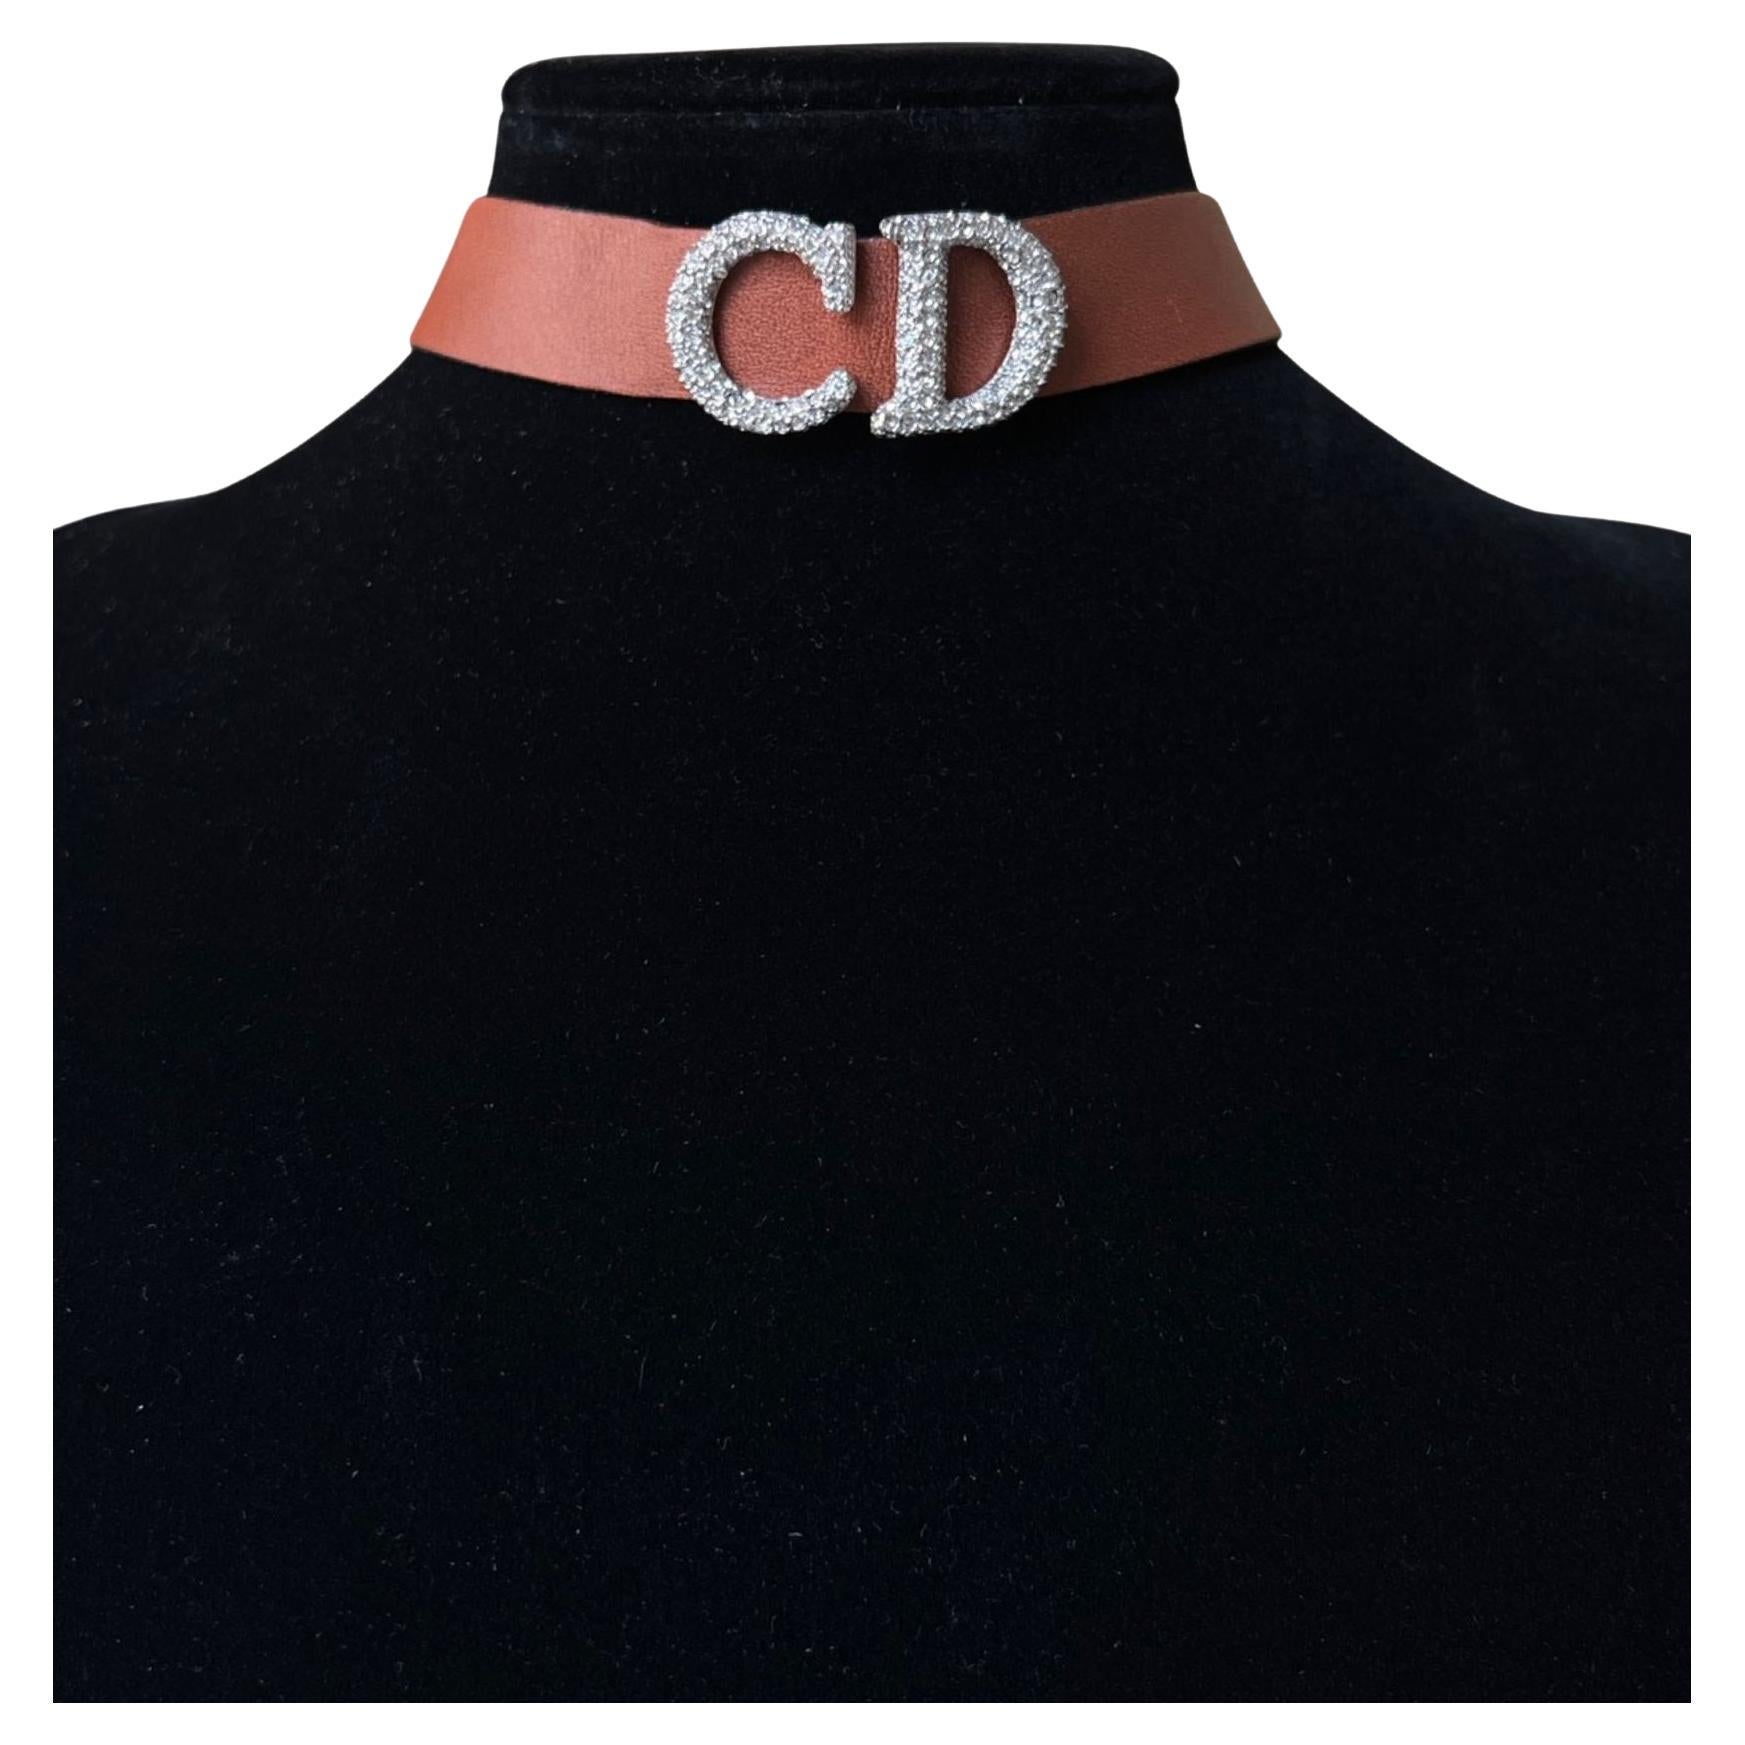 Dior Spring 2000 by John Galliano Tan Leather CD Choker For Sale